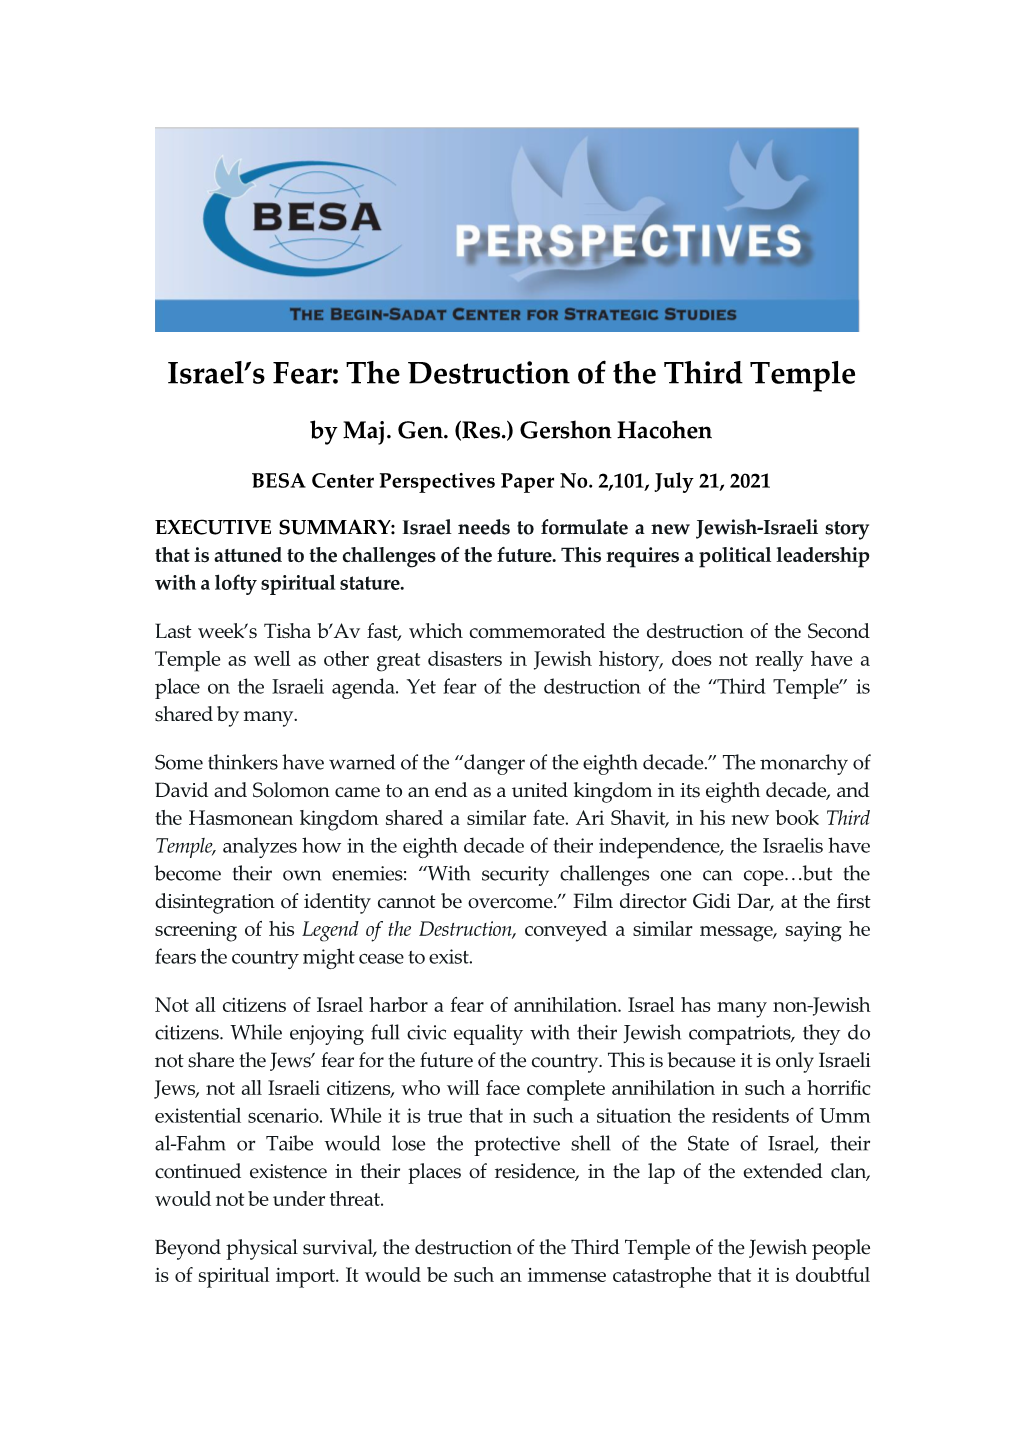 Israel's Fear: the Destruction of the Third Temple